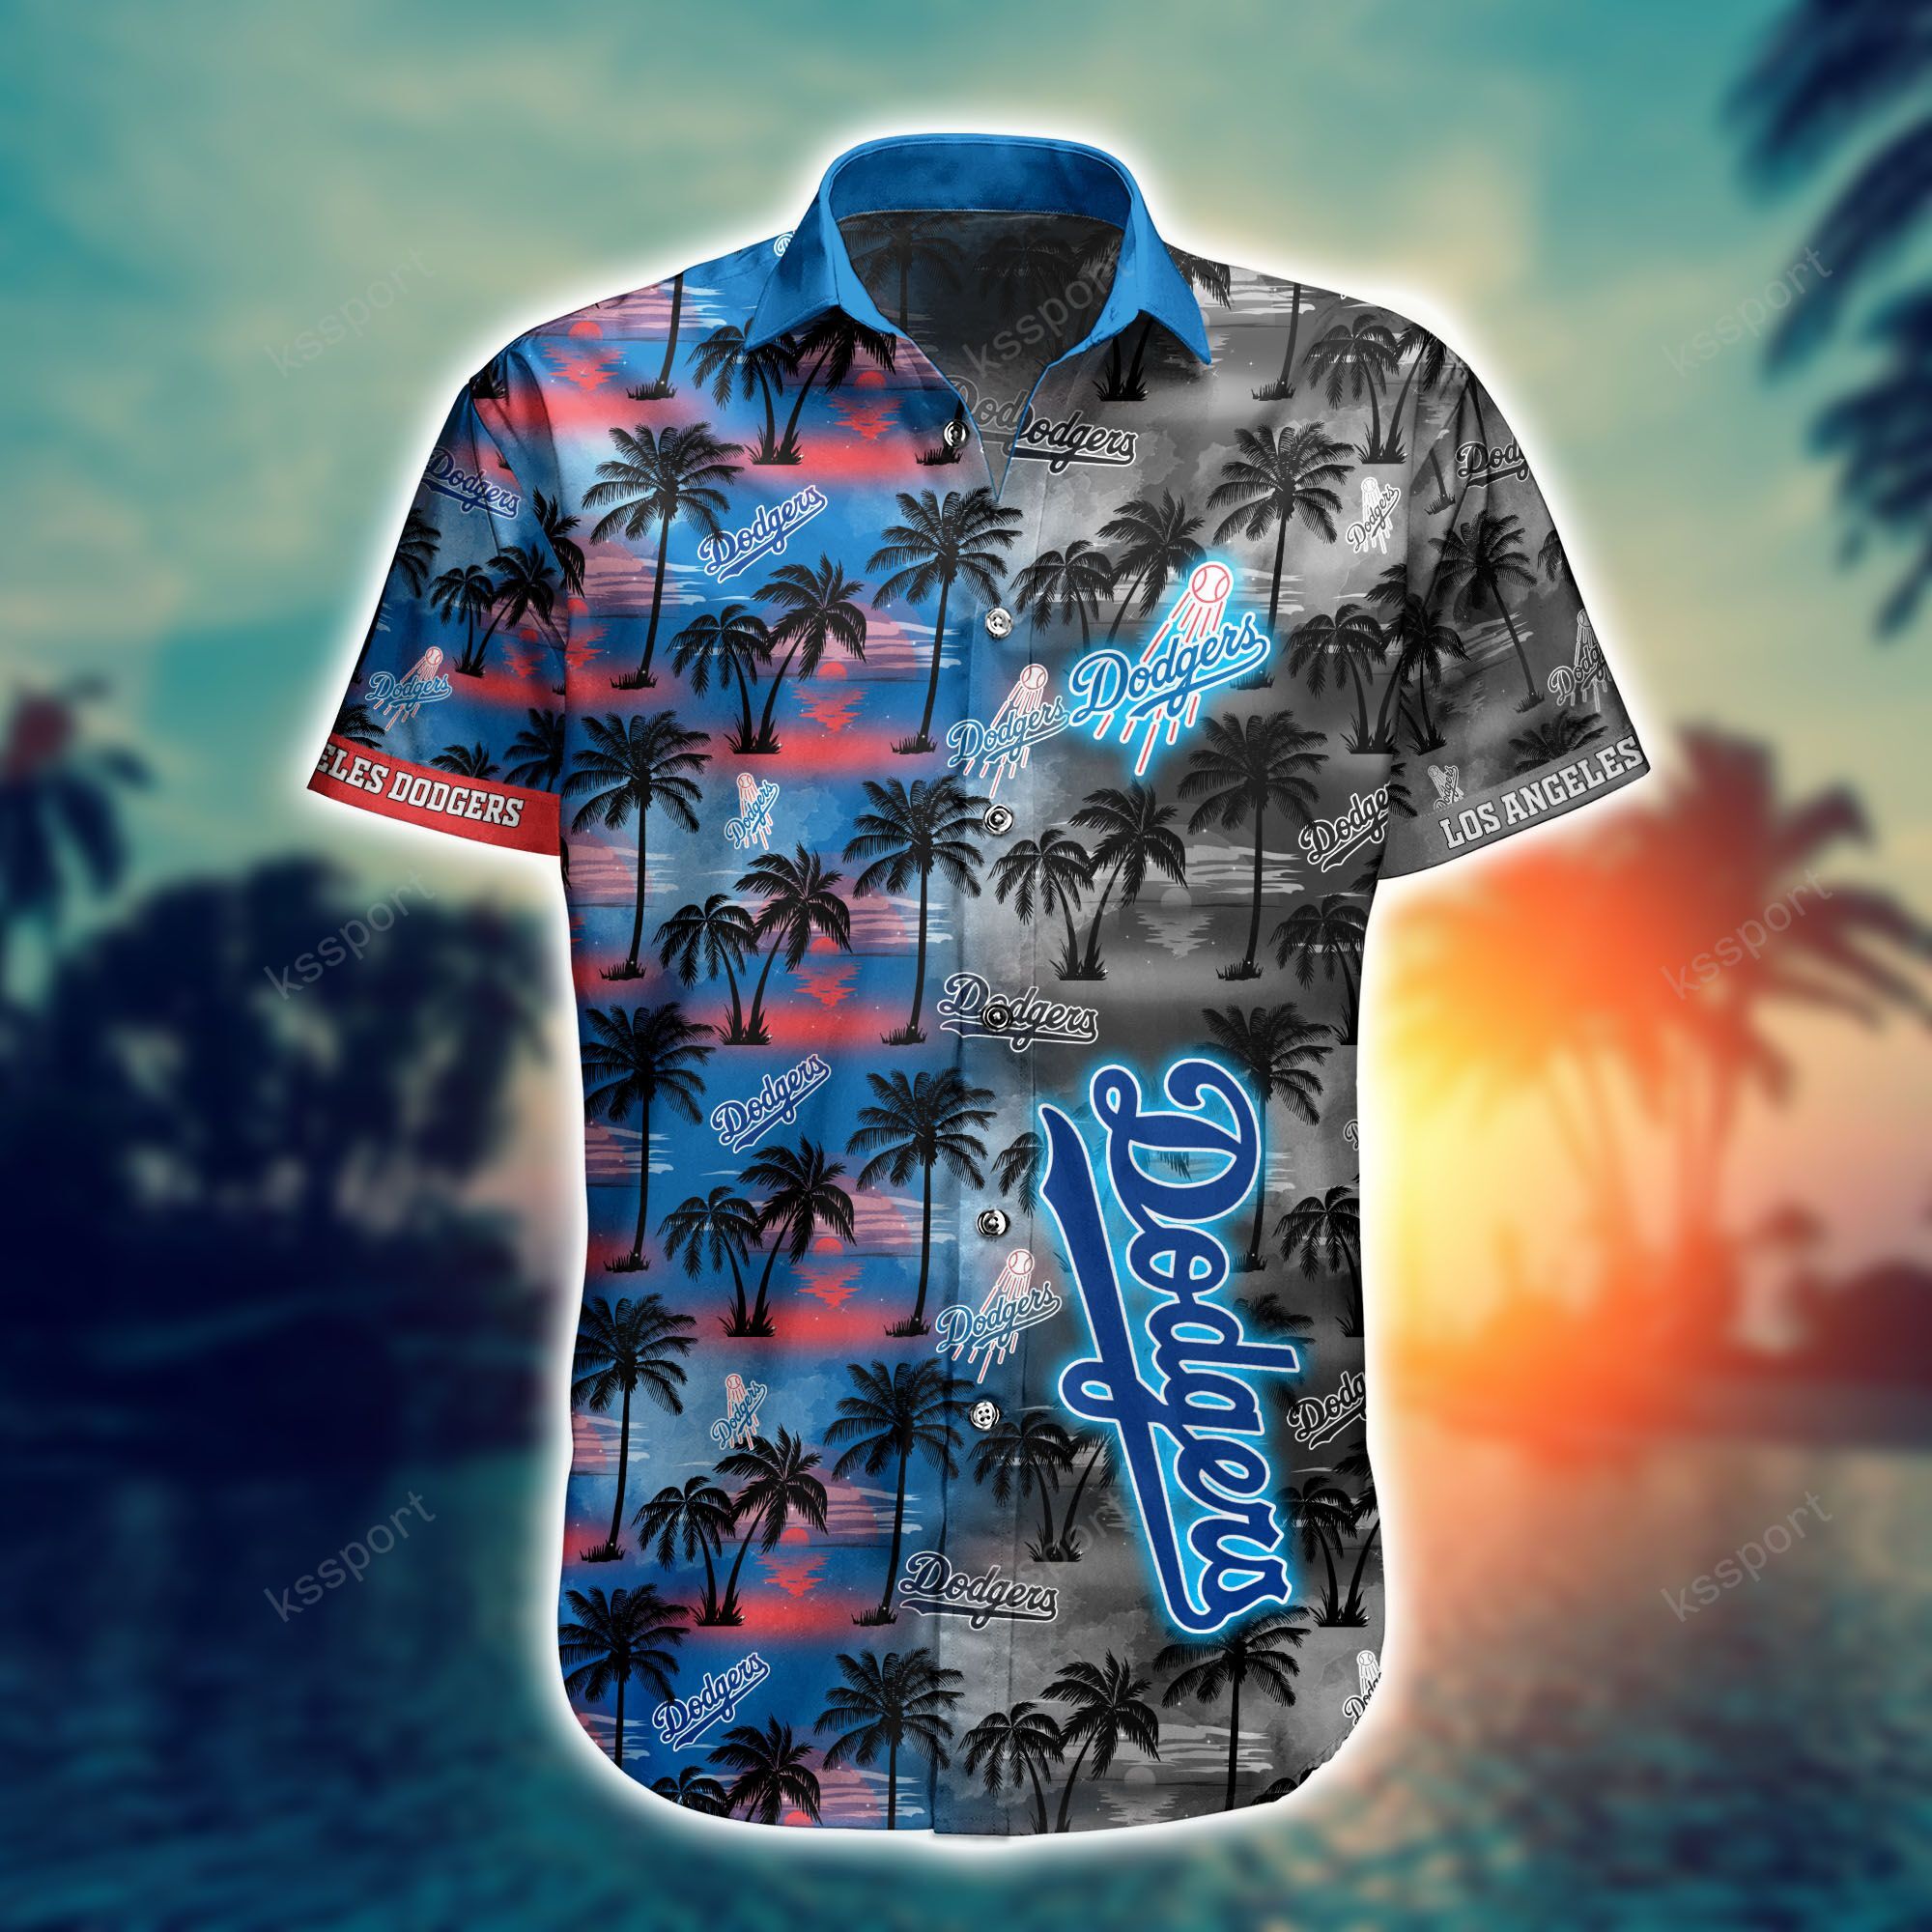 Top cool Hawaiian shirt 2022 - Make sure you get yours today before they run out! 234